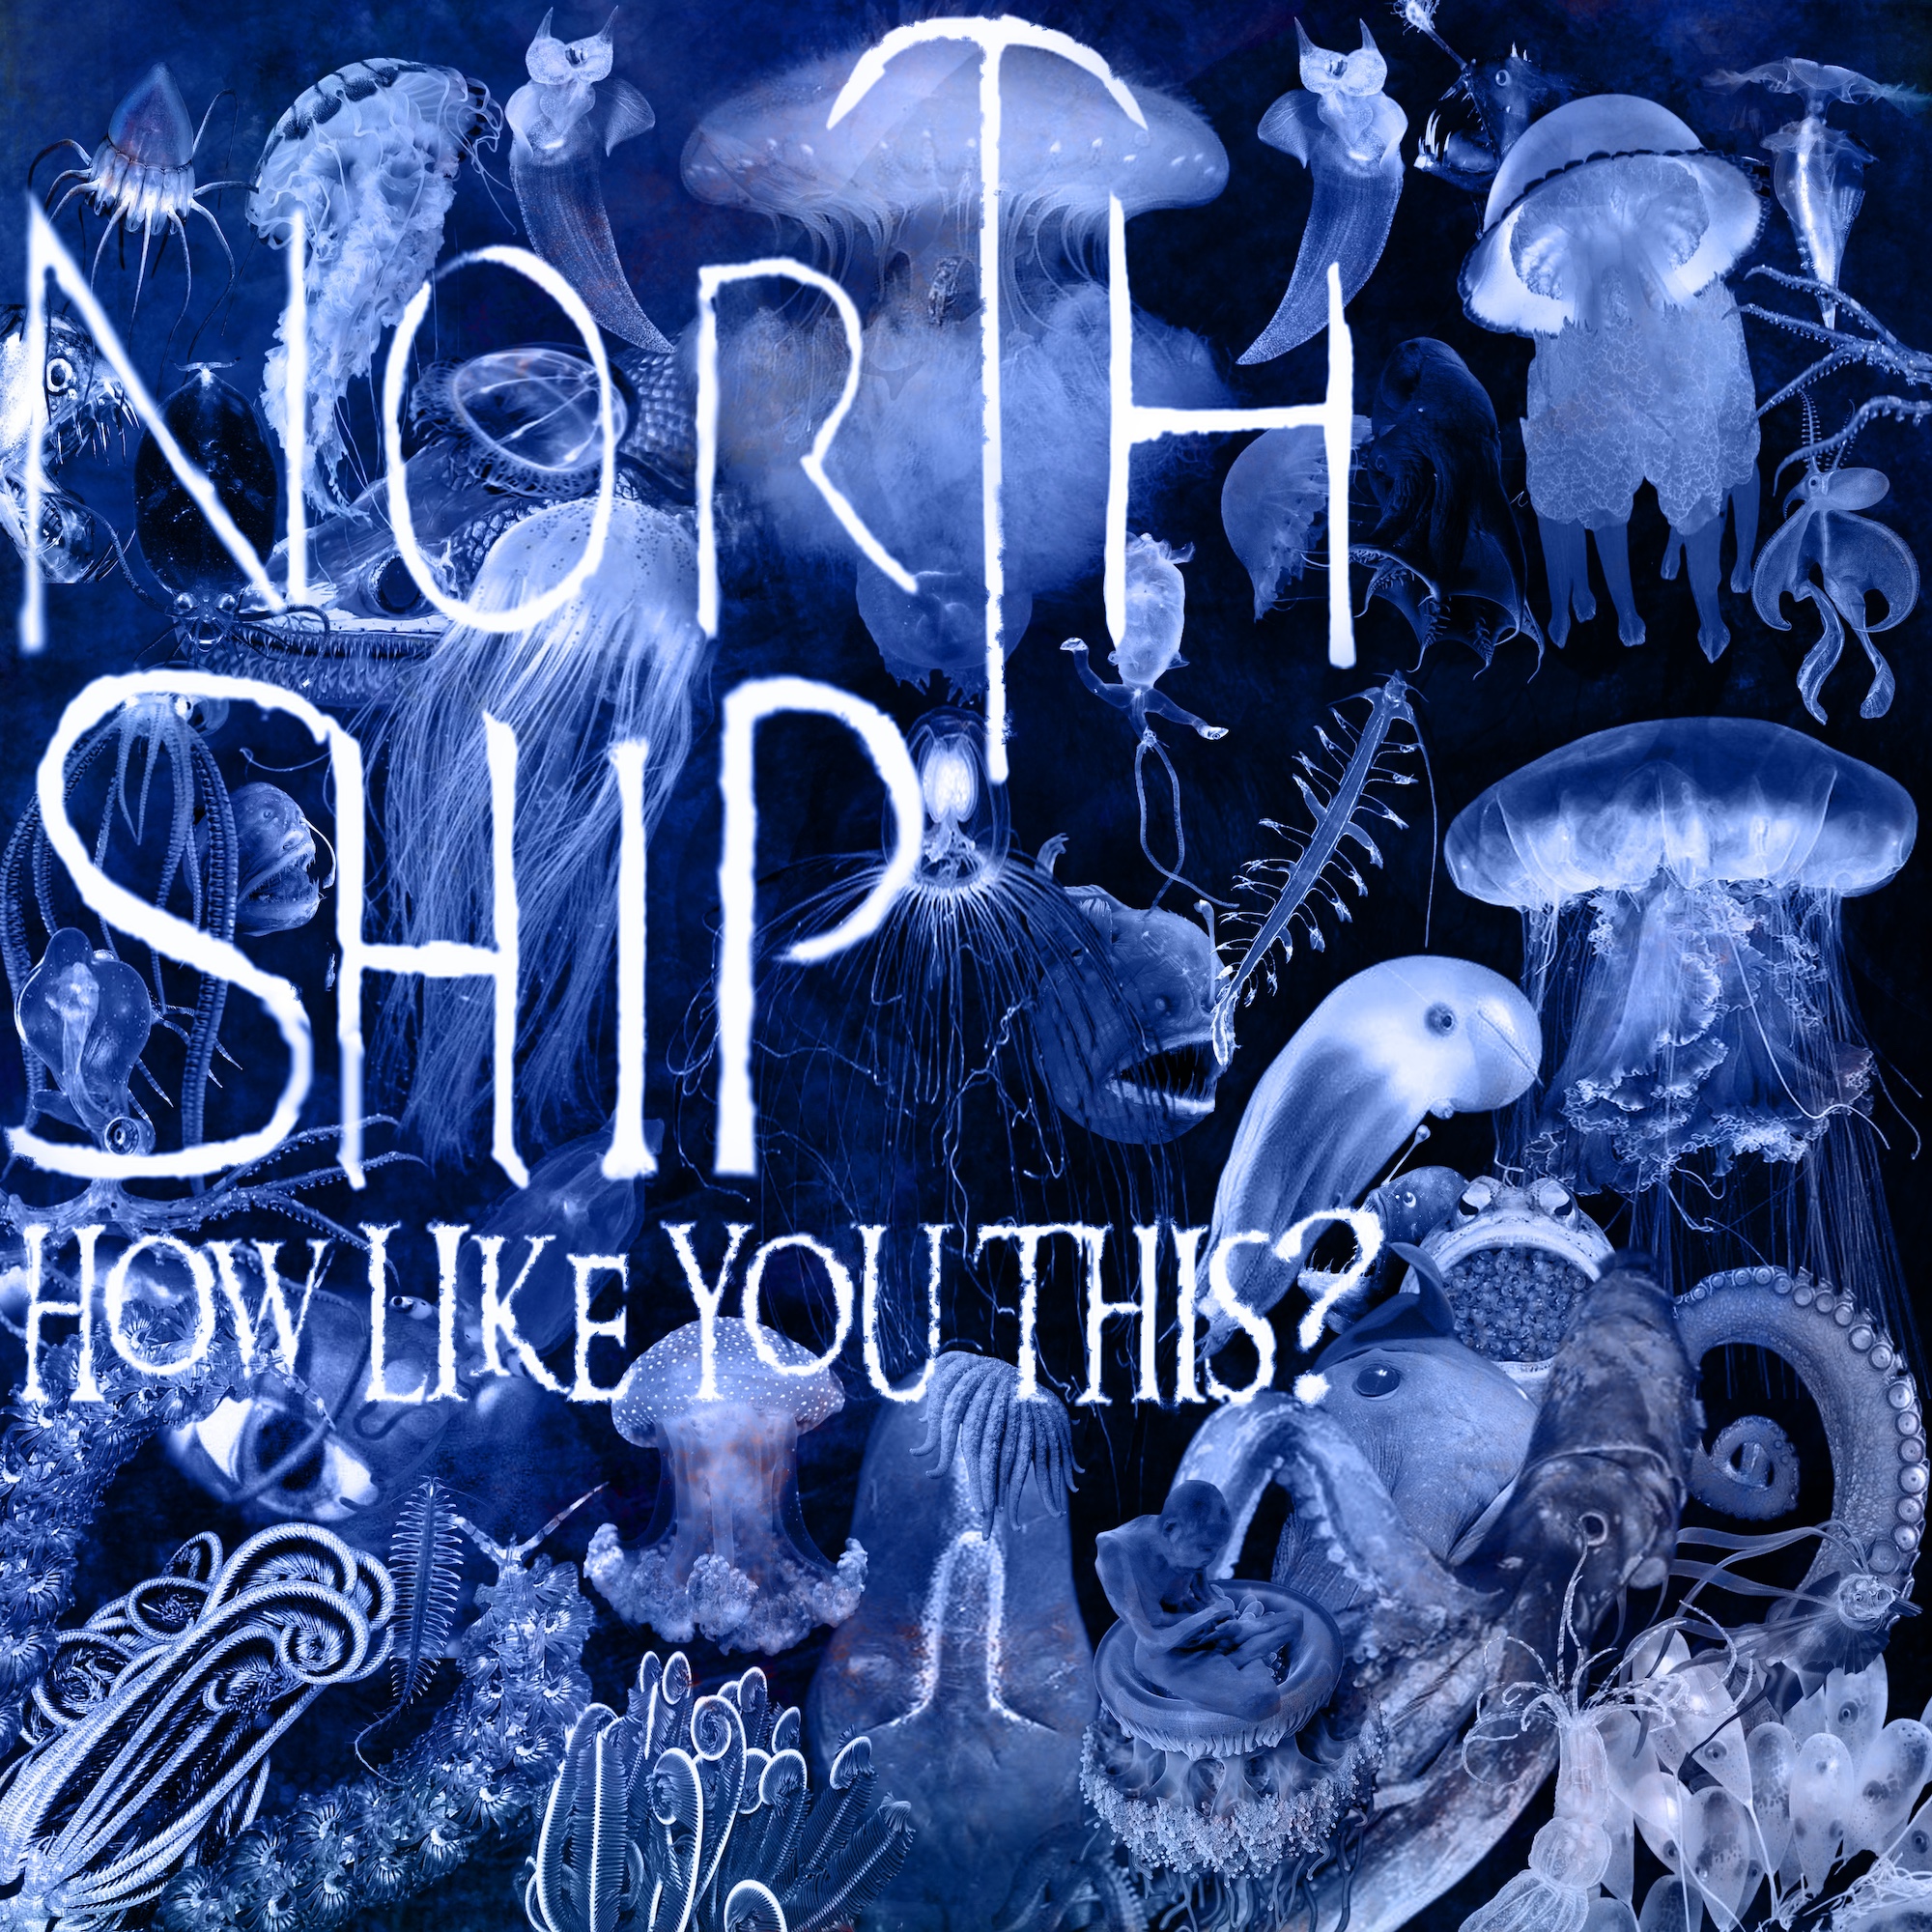 North Ship To Release New Single, “How Like You This?”